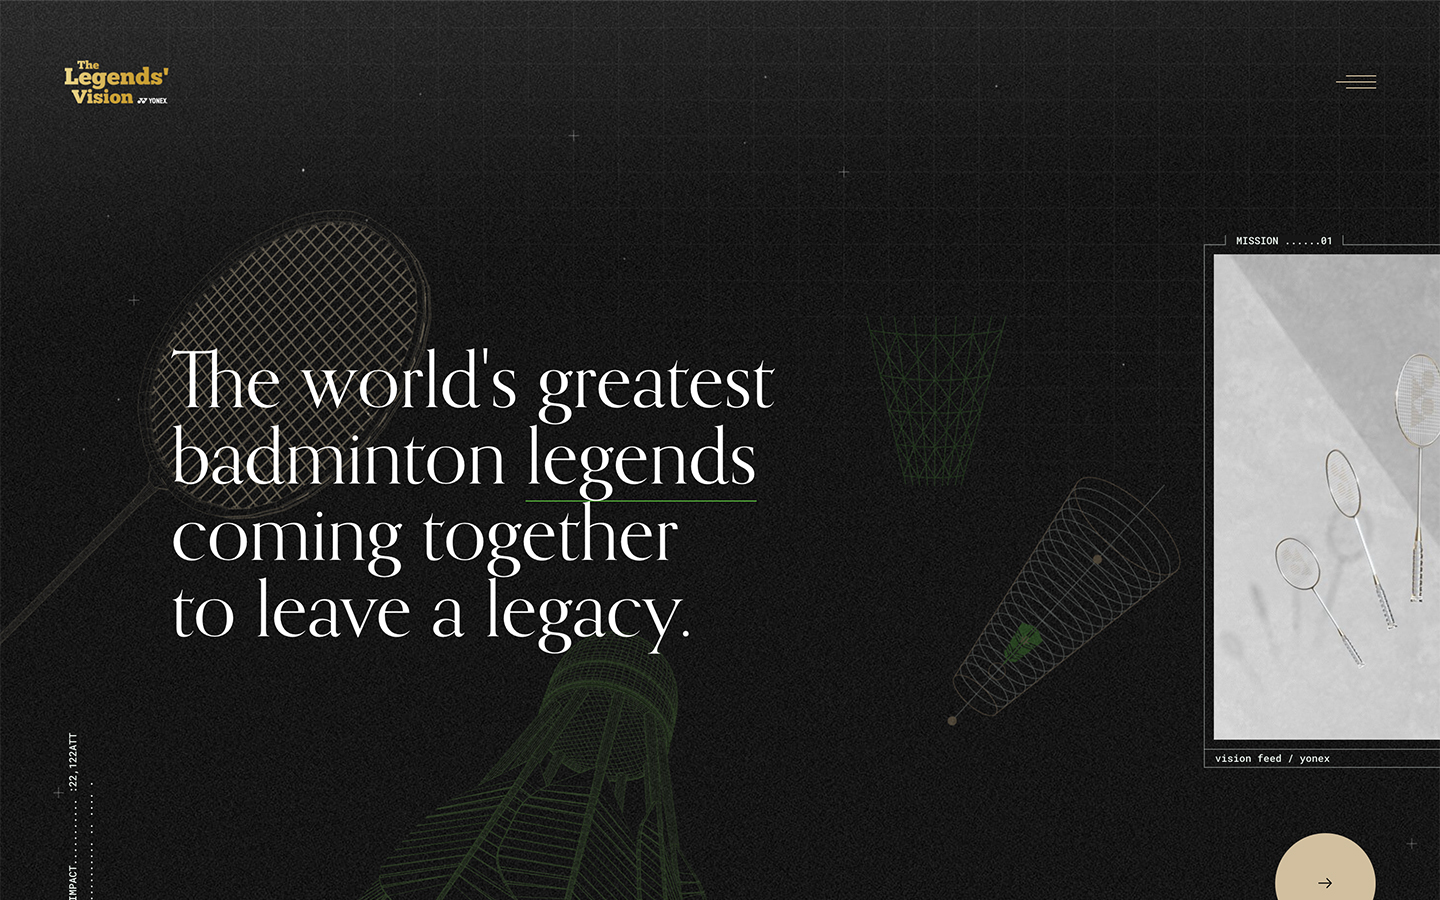 The Legends’ Vision for Badminton | by Yonex